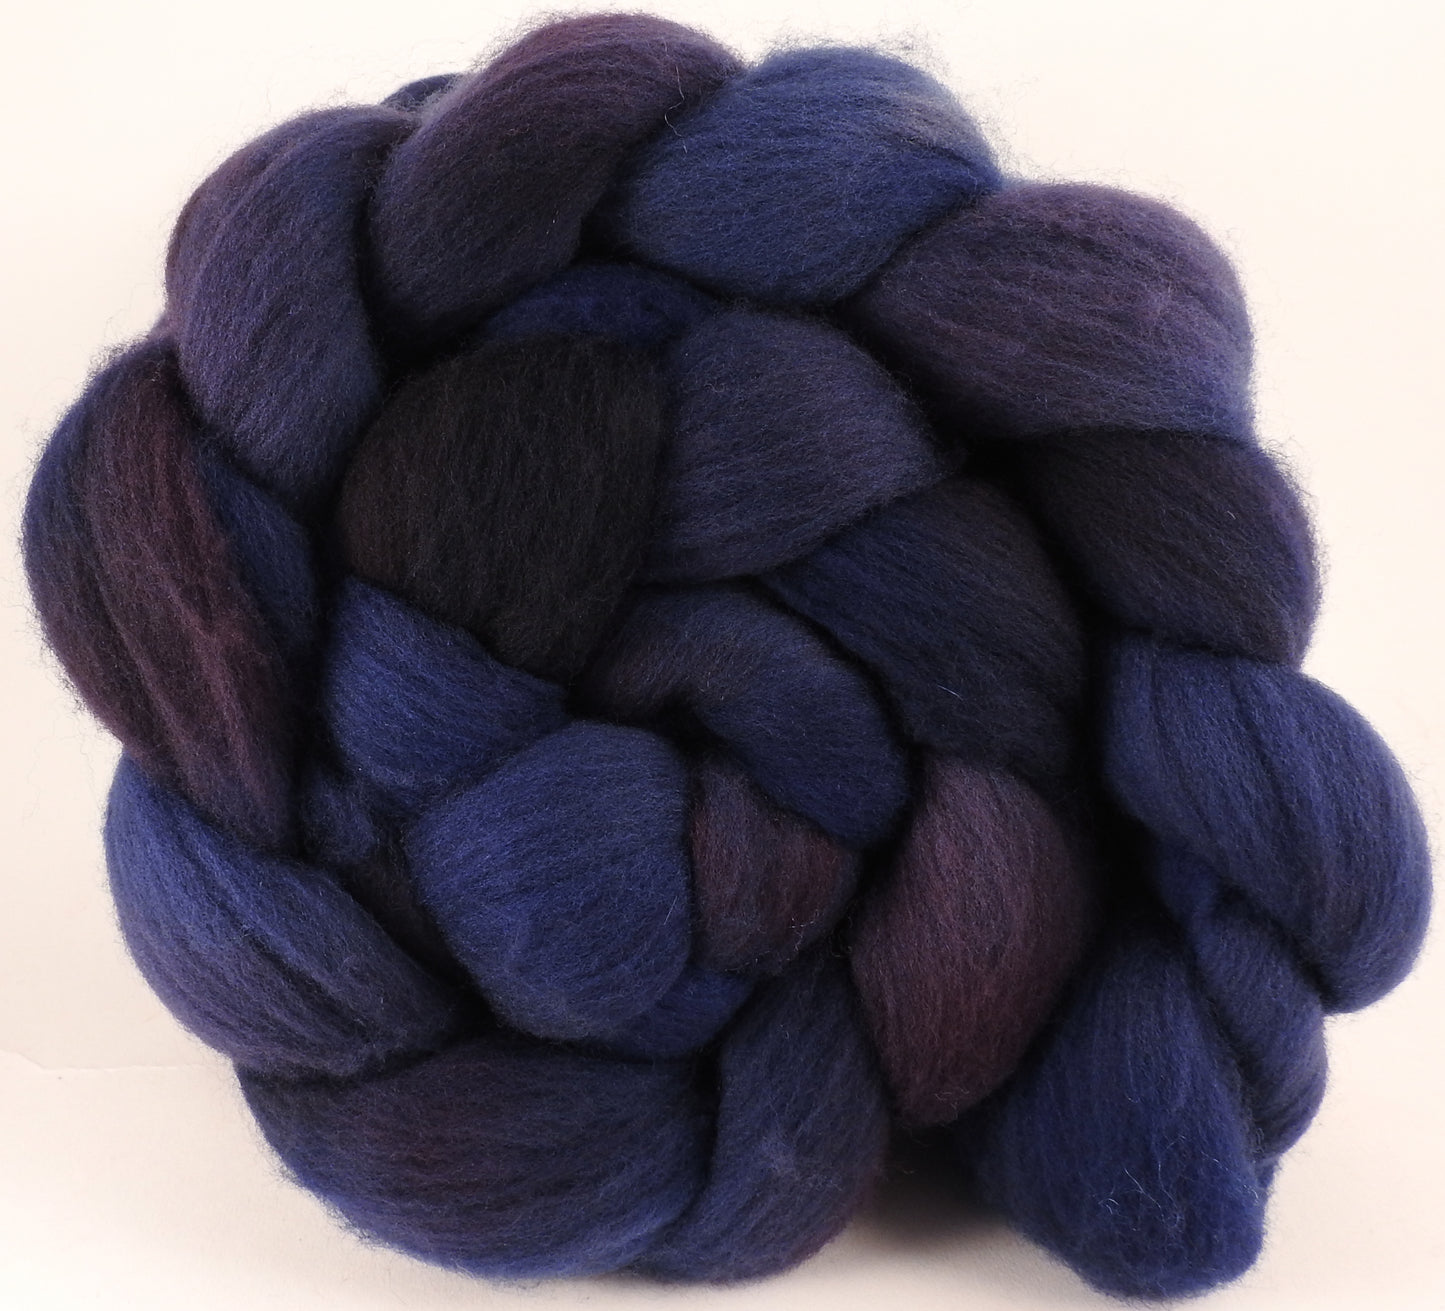 Hand dyed top for spinning -Midnight- (5.3 oz.) Organic Polwarth - Inglenook Fibers